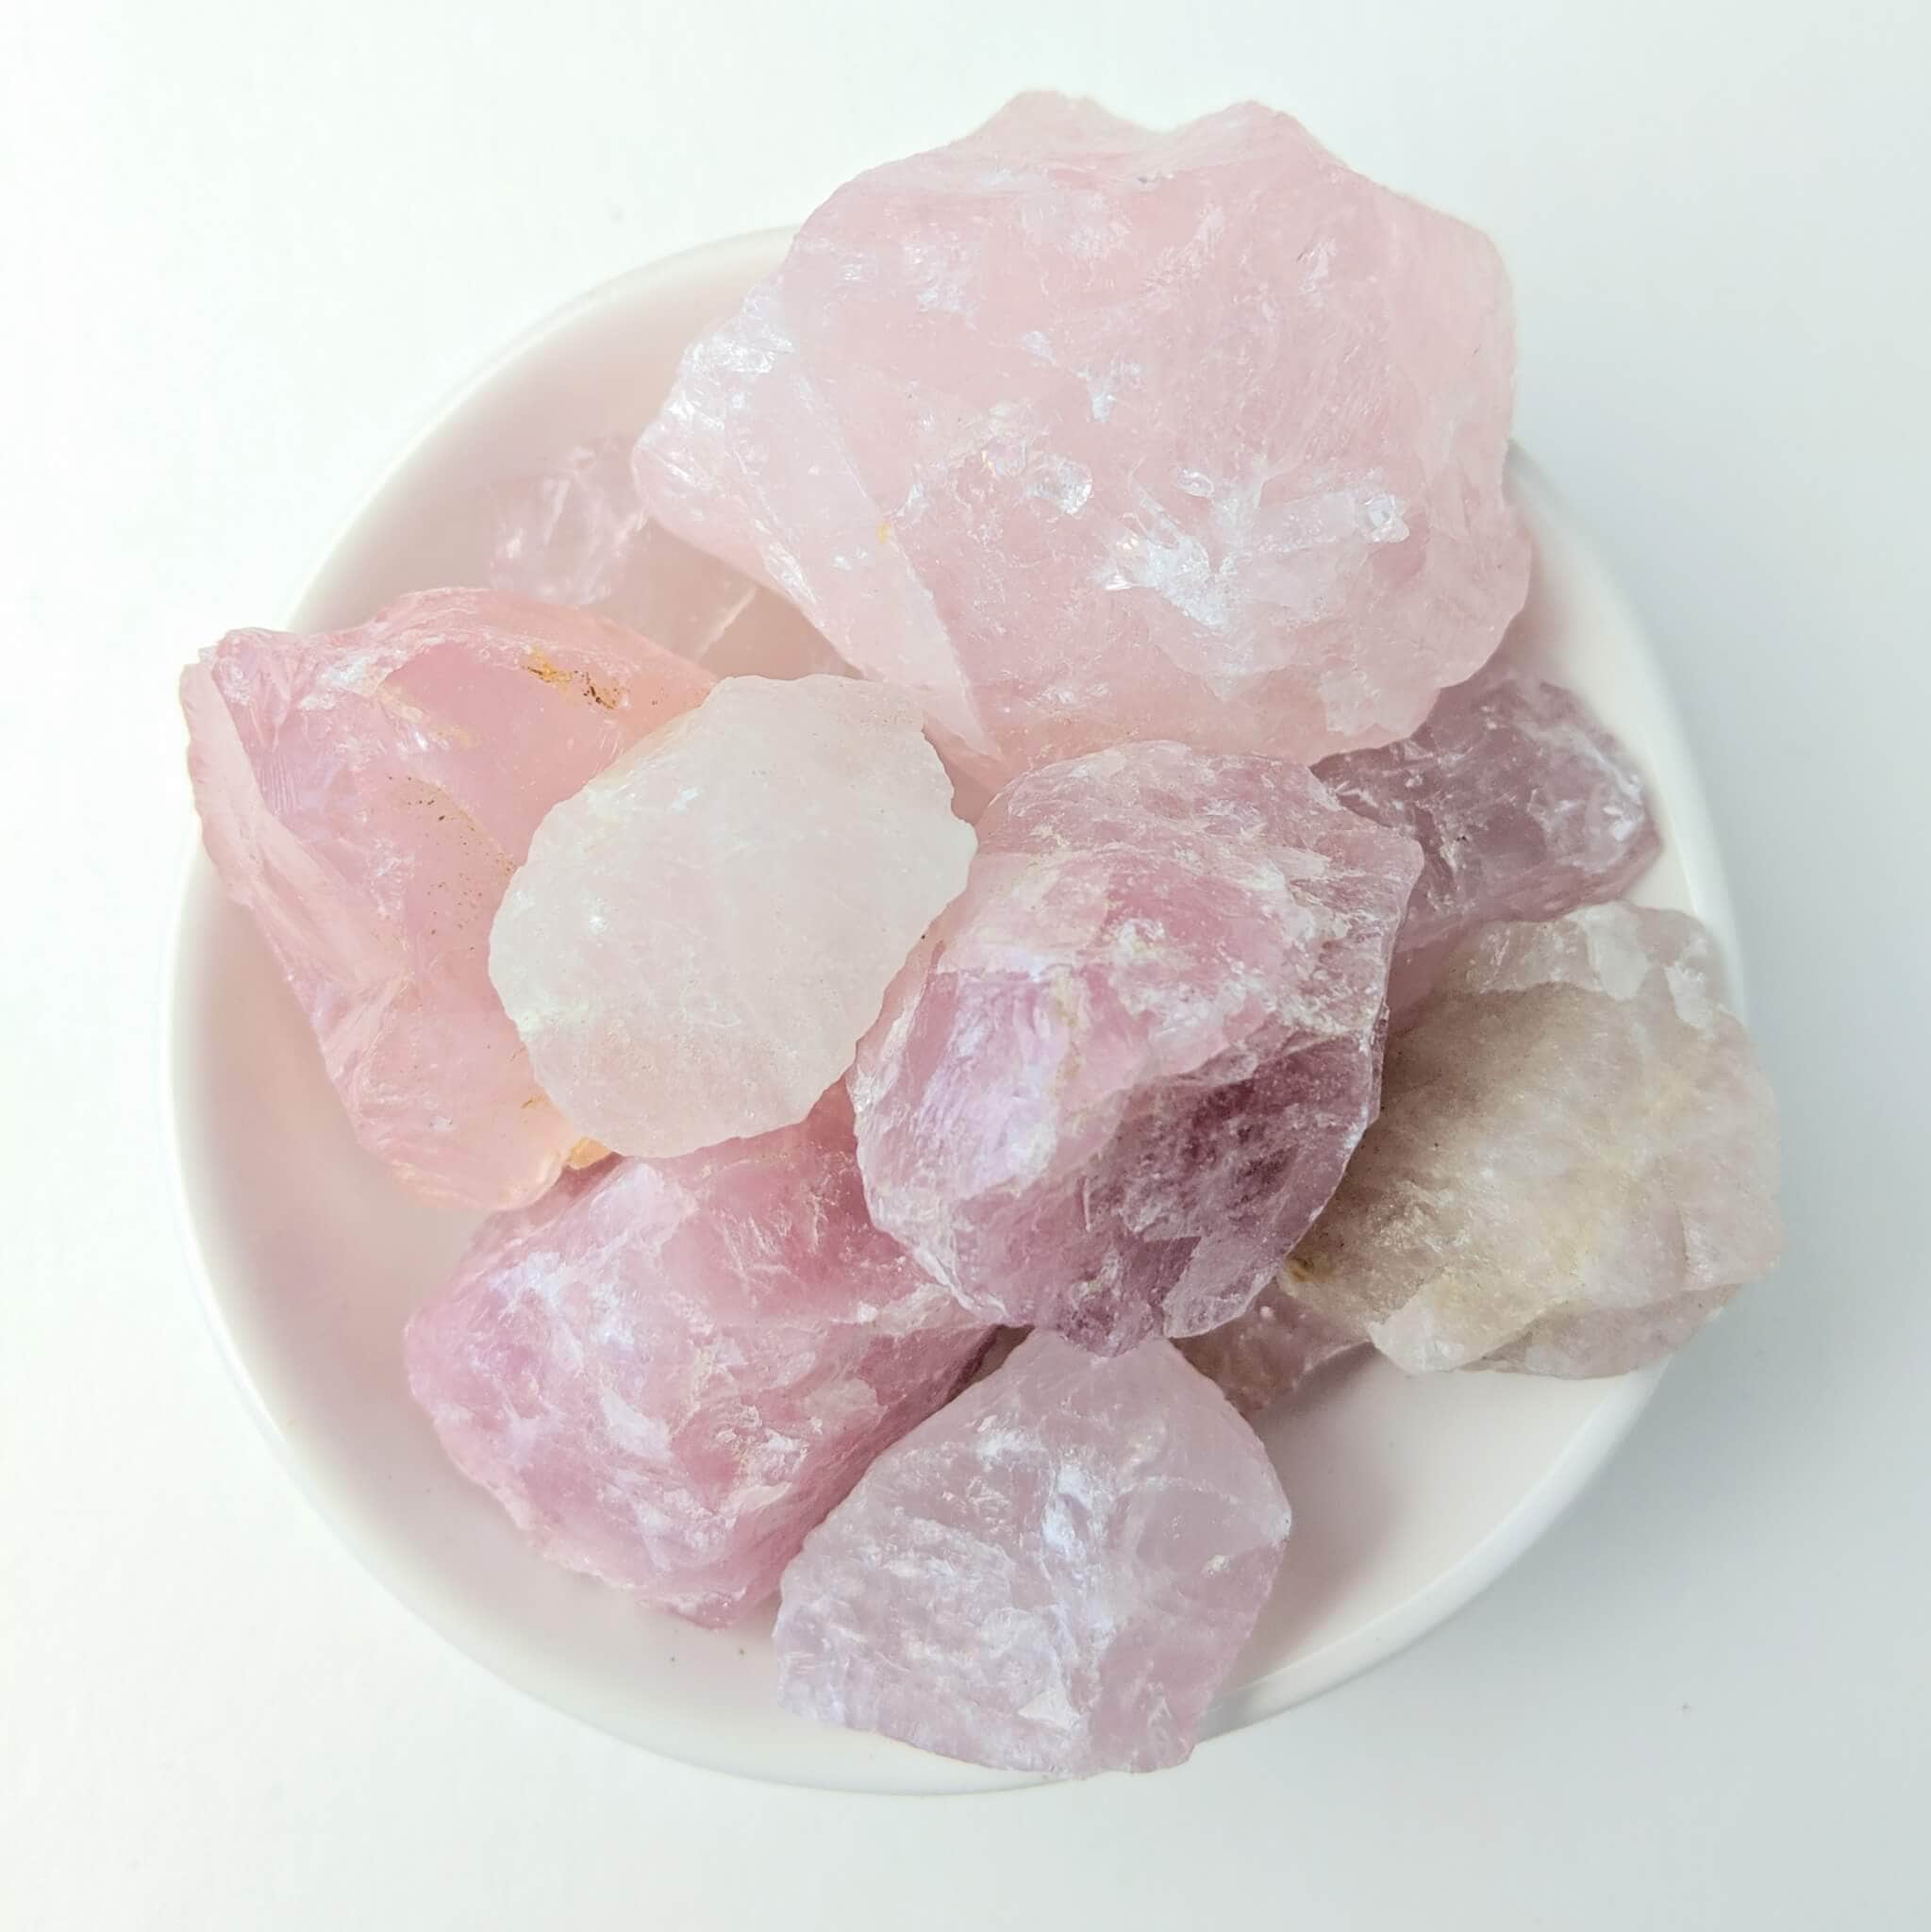 Rose Quartz Crystal Raw Pieces in a White Bowl Top View